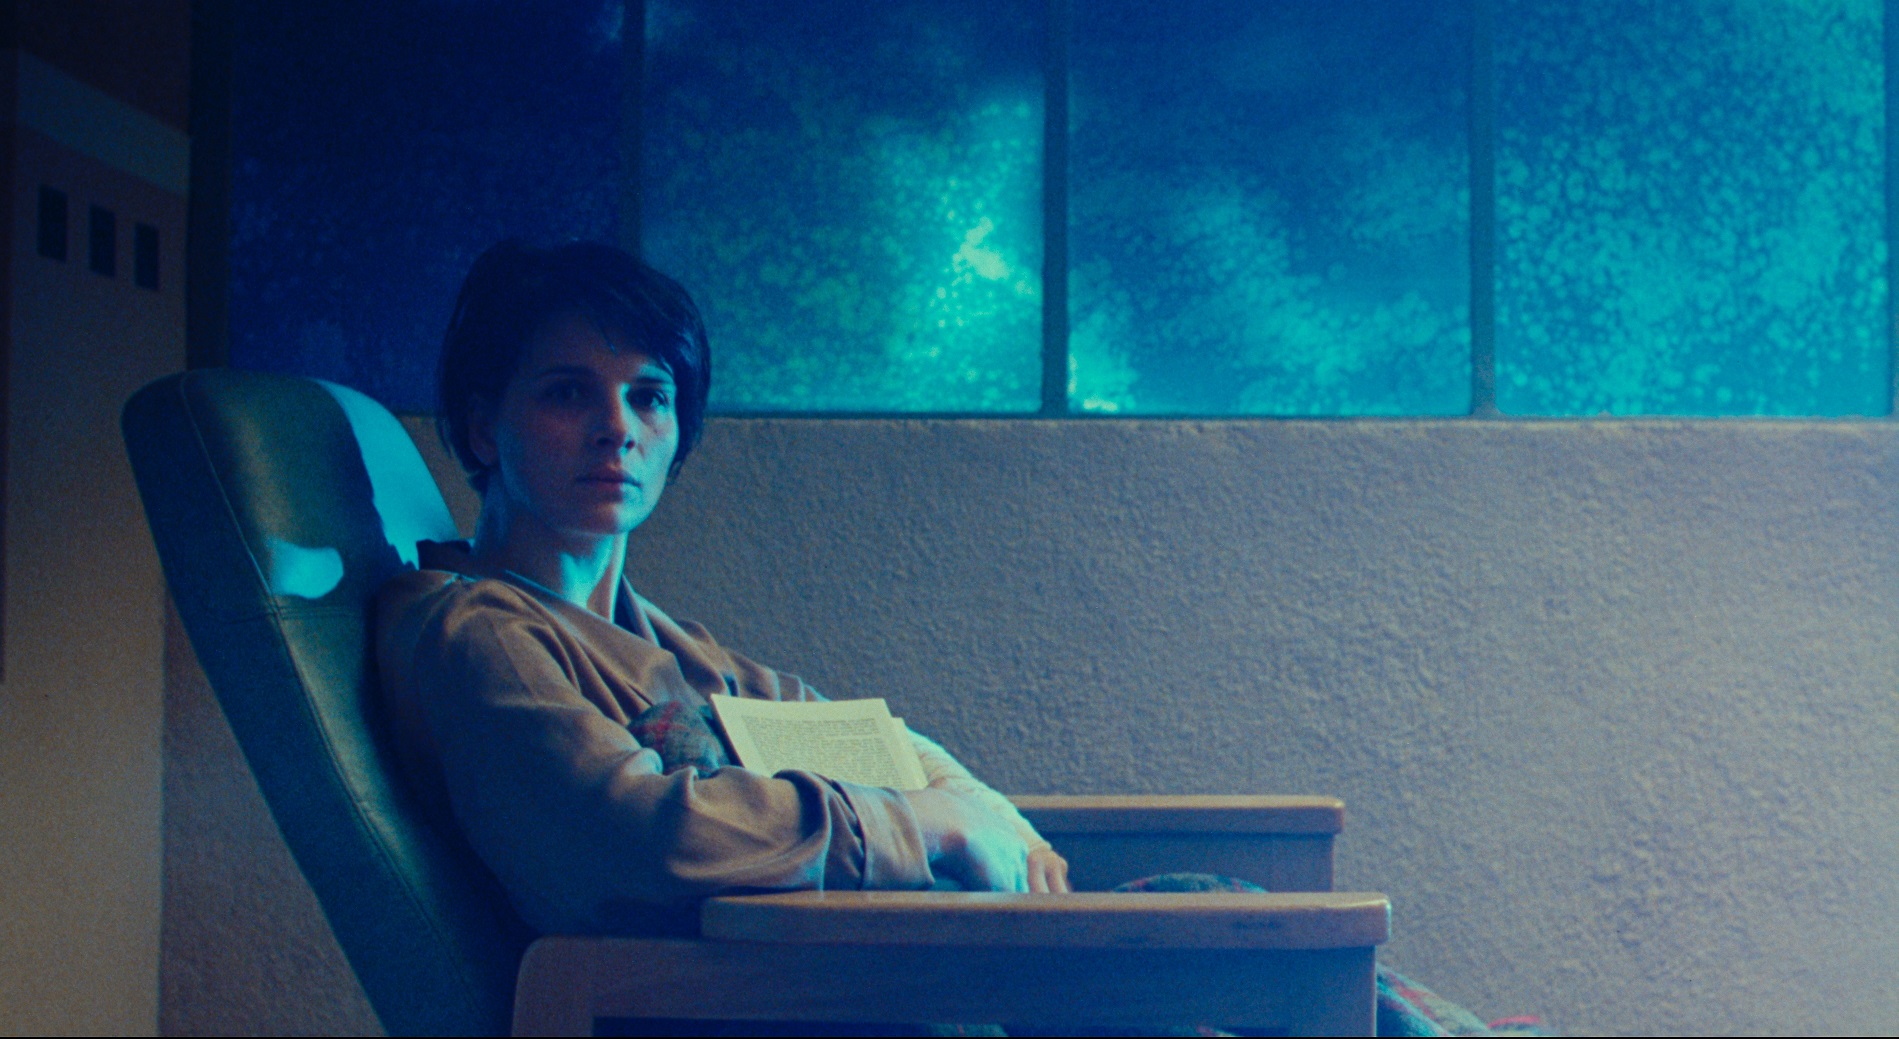  A woman sits on a reclining seat, bathed in blue light and shadow. 